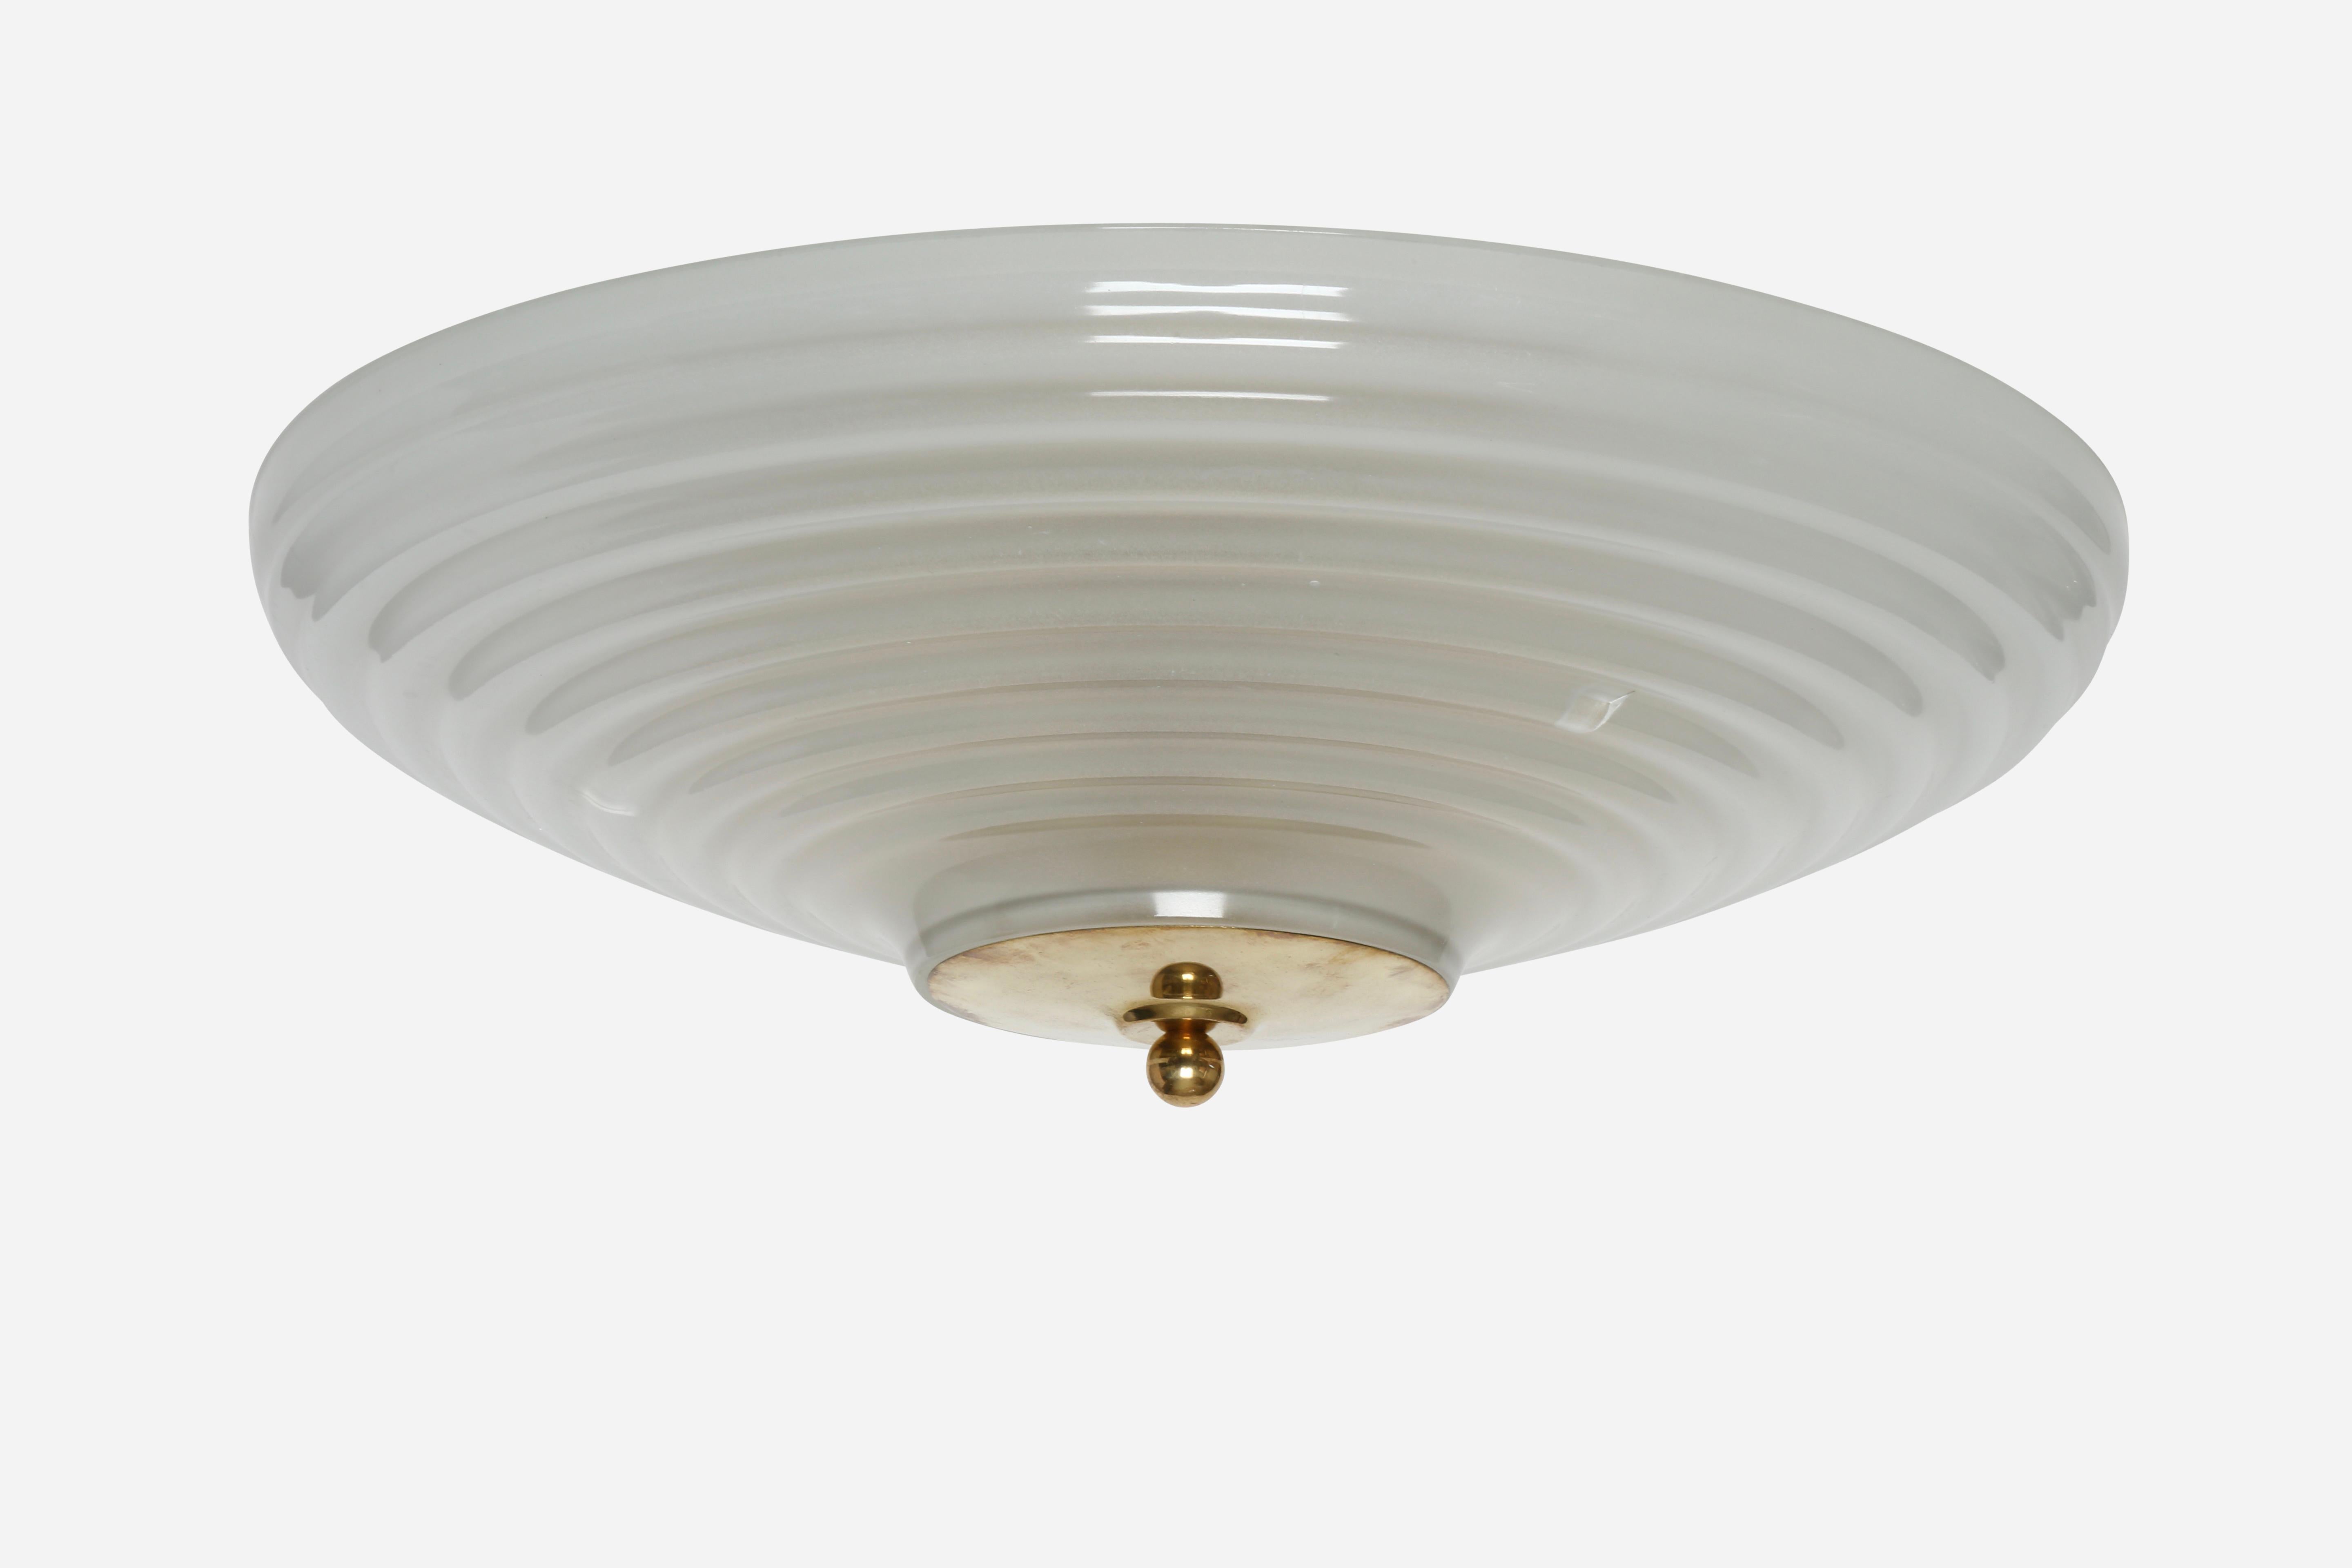 Large flush mount by Fidenza Vetraria, attributed.
Designed and manufactured in Italy in 1960s.
Five candelabra sockets.
Complimentary US rewiring upon request.

We take pride in bringing vintage fixtures to their full glory again.
At Illustris